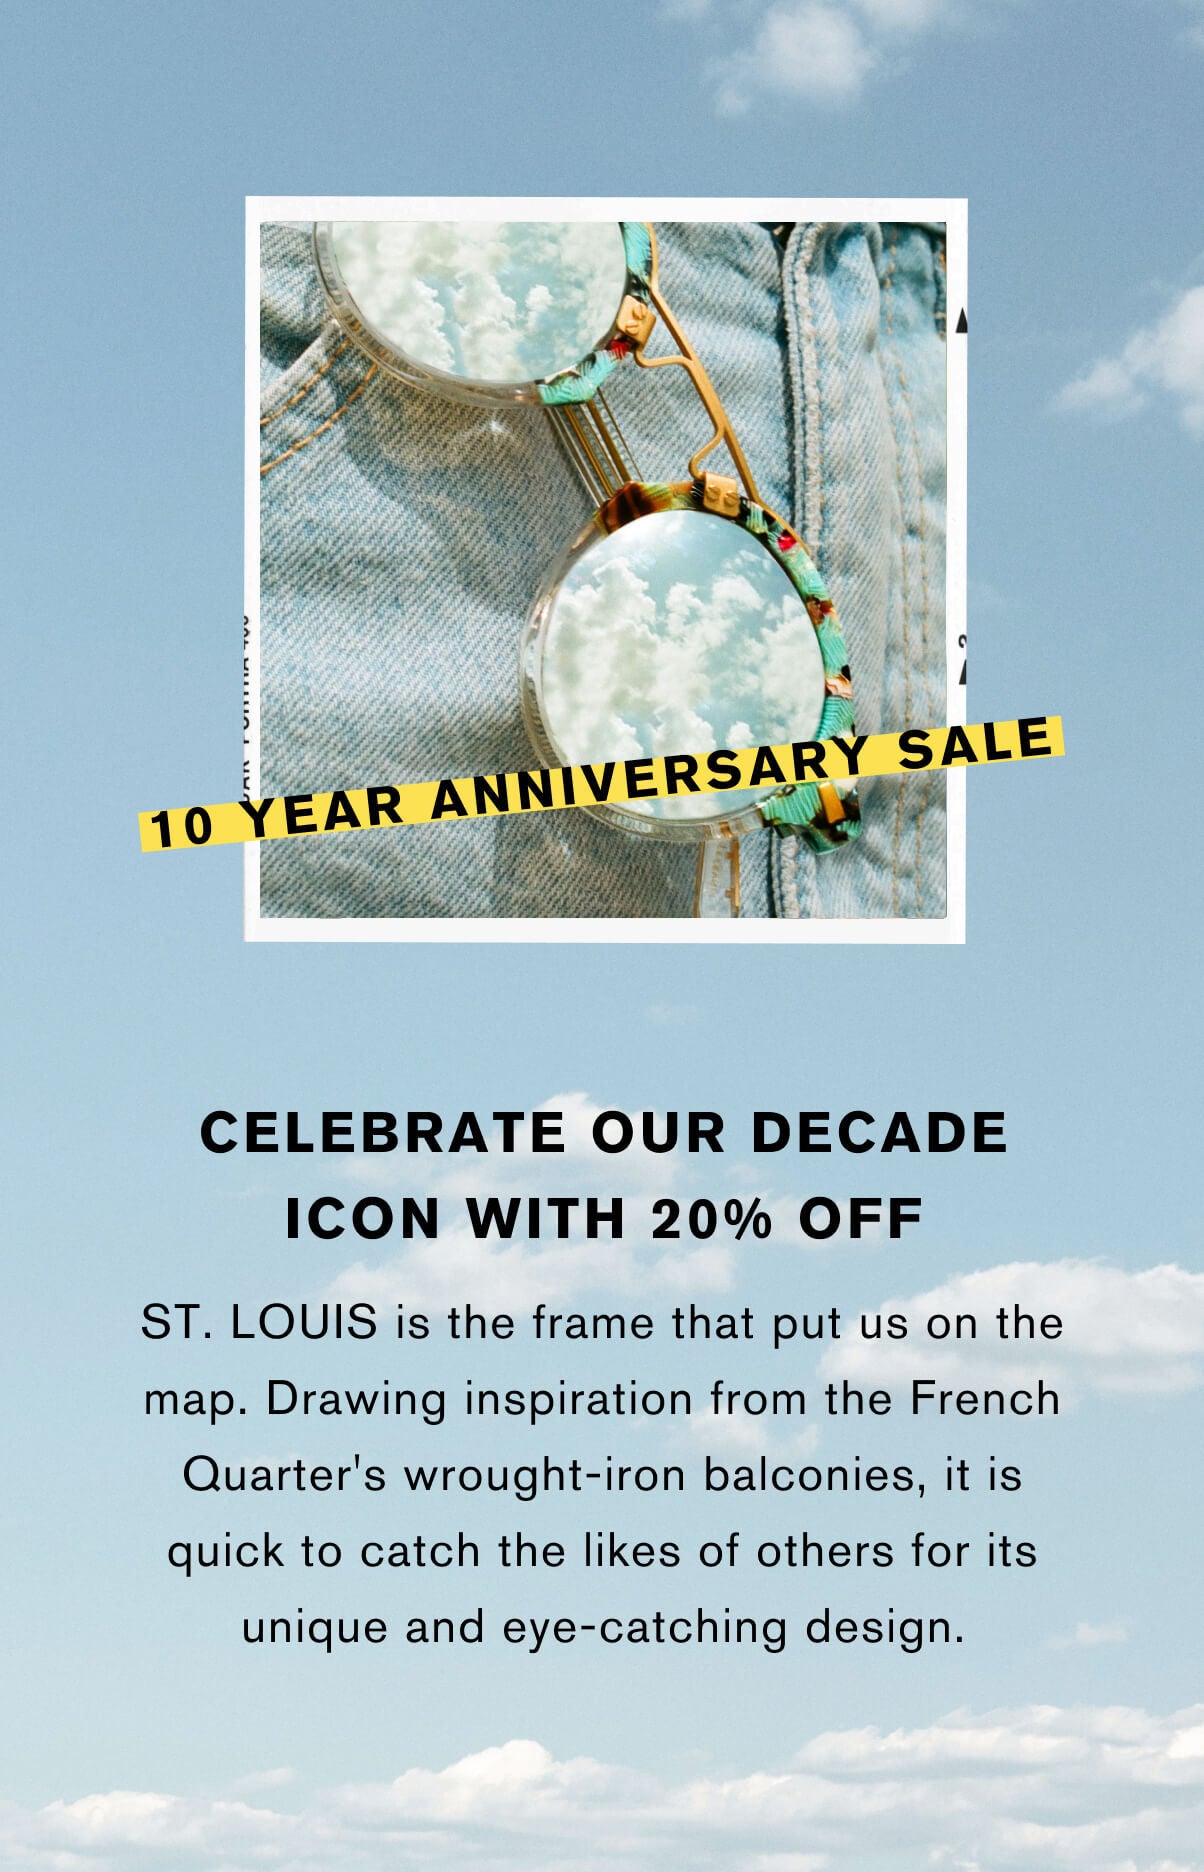 Celebrate our decade icon with 20% off St. Louis is the frame that put us on the map. drawing inspiration from the French Quarter's wrought-iron balconies, it is quick to catch the likes of others for its unique and eye-catching design.